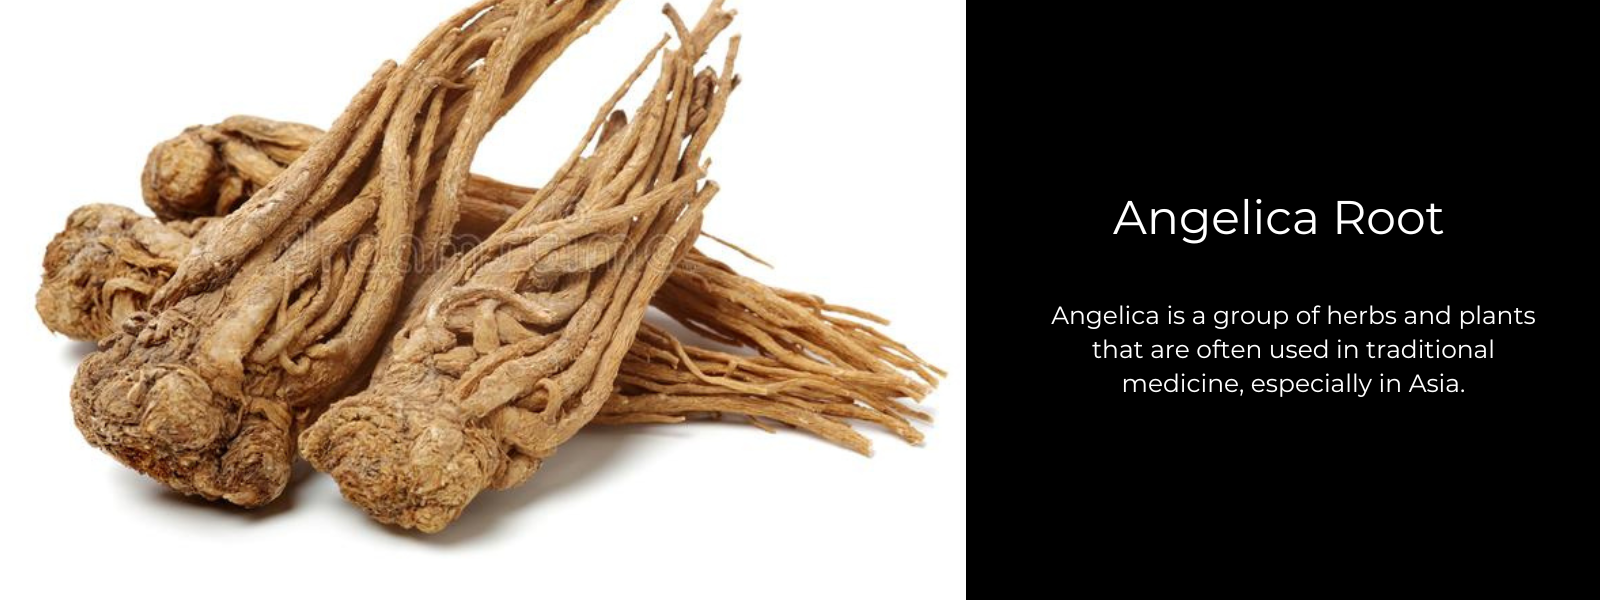 Angelica Root - Health Benefits, Uses and Important Facts